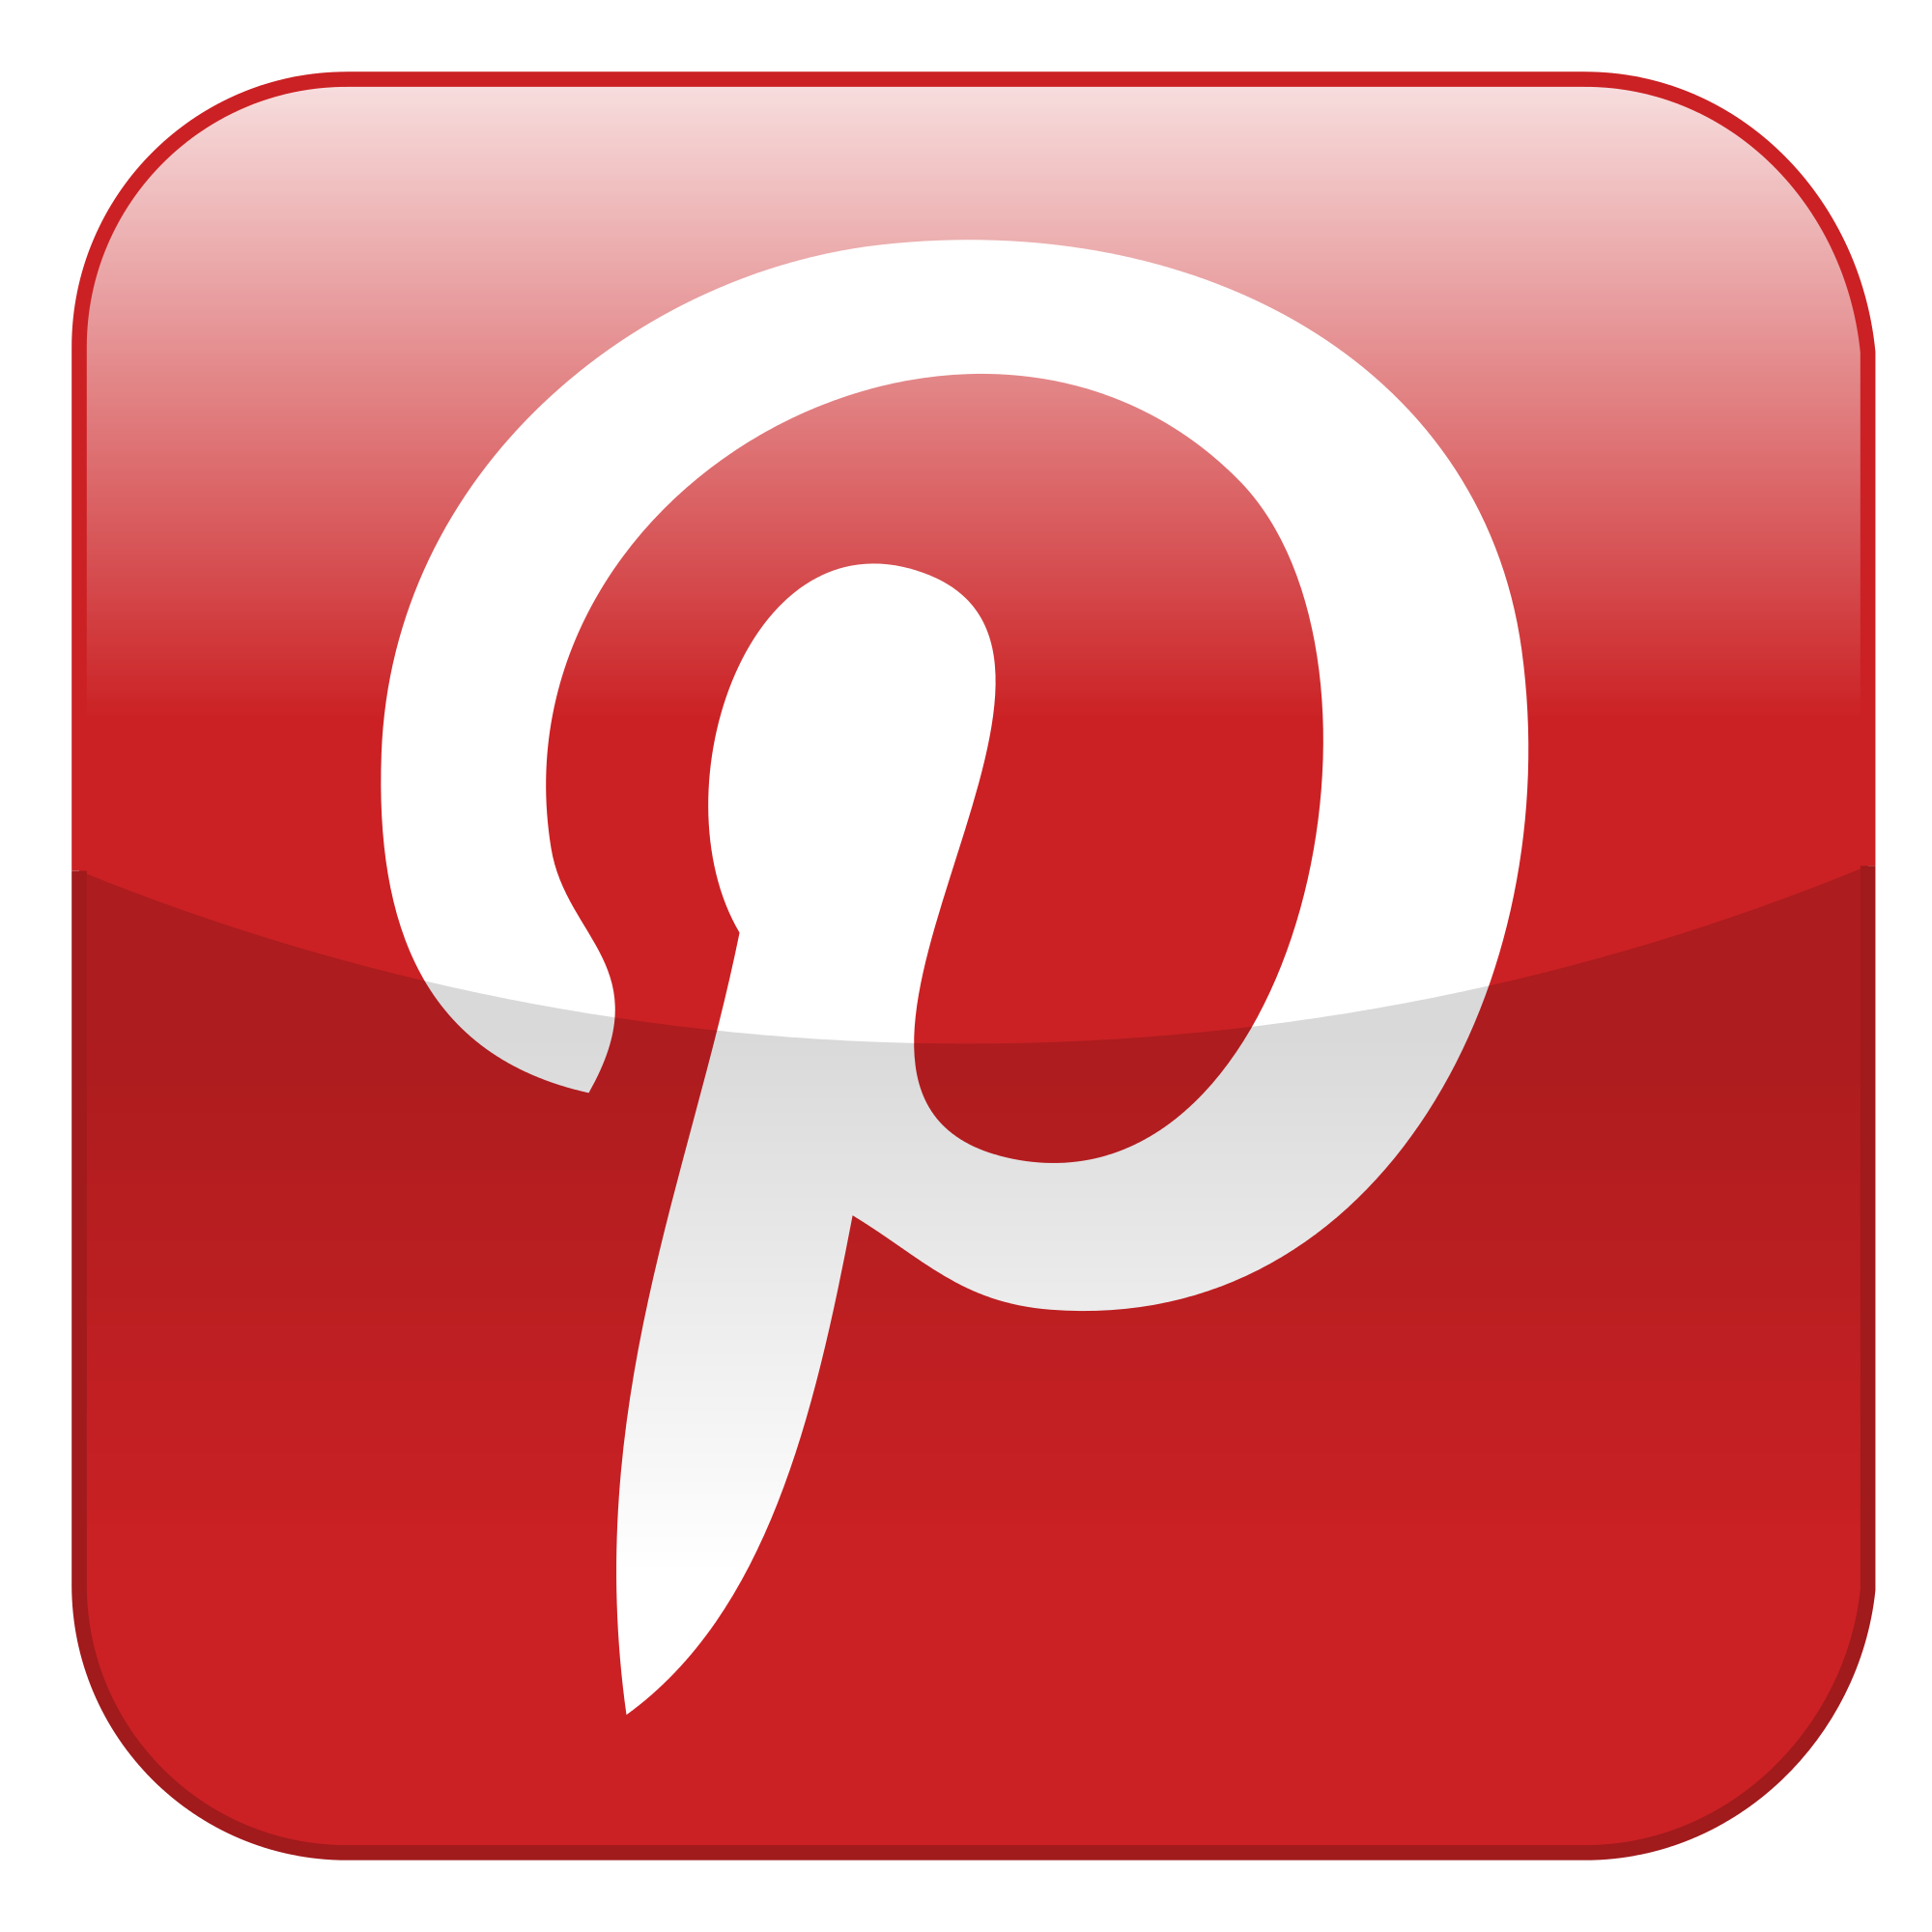 Pinterest Icon 512x512 png